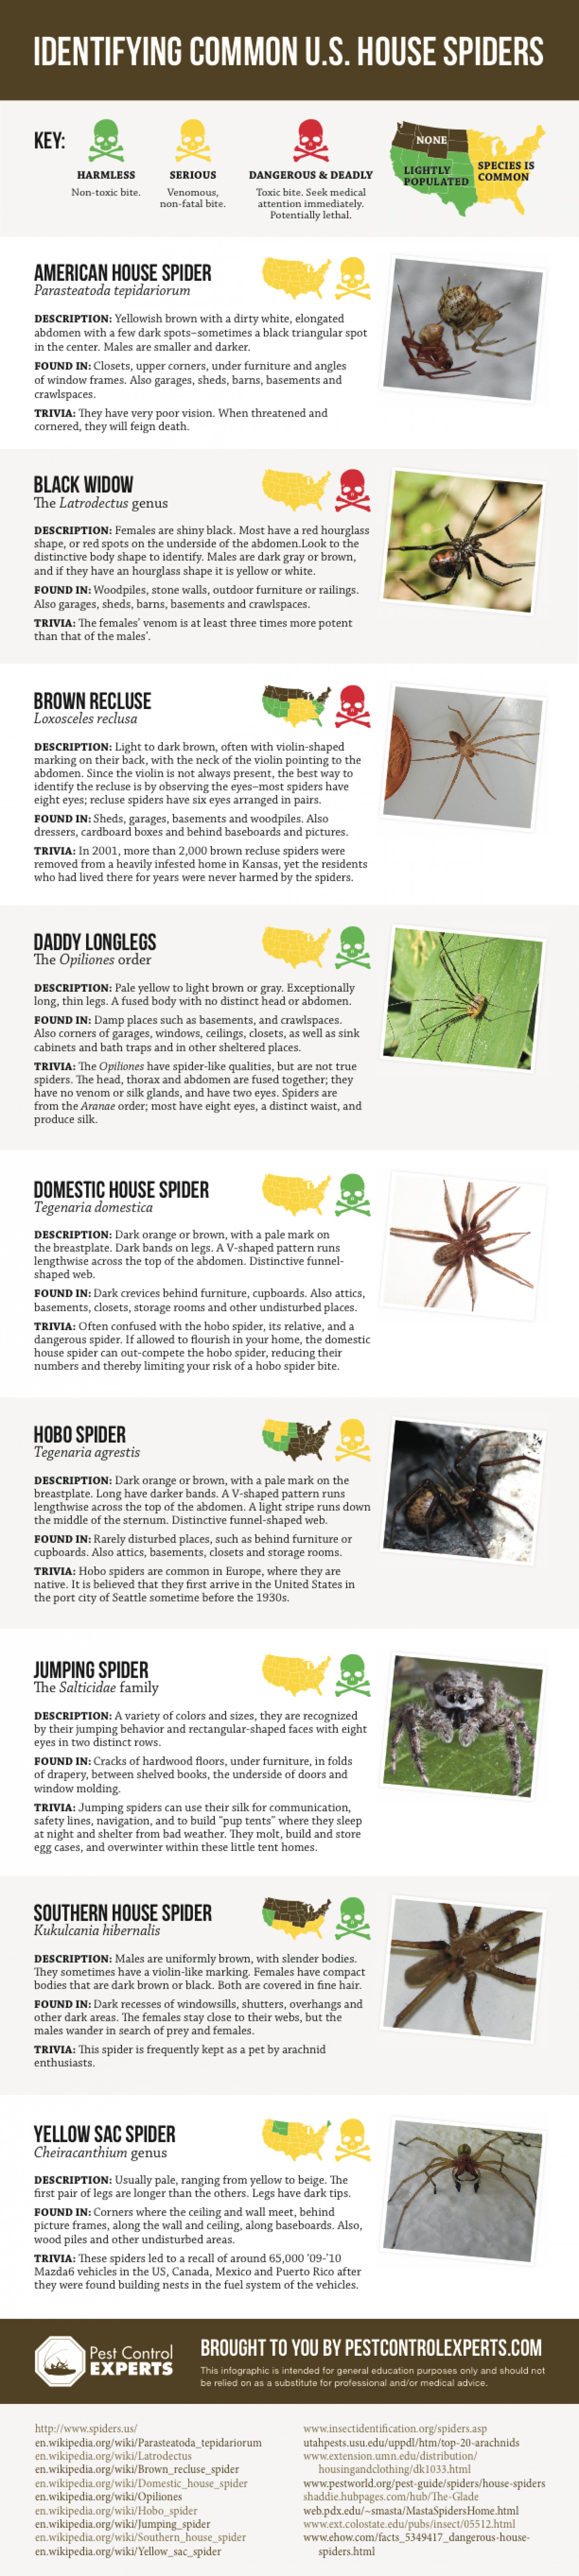 Harmless and Harmfull spiders infographic